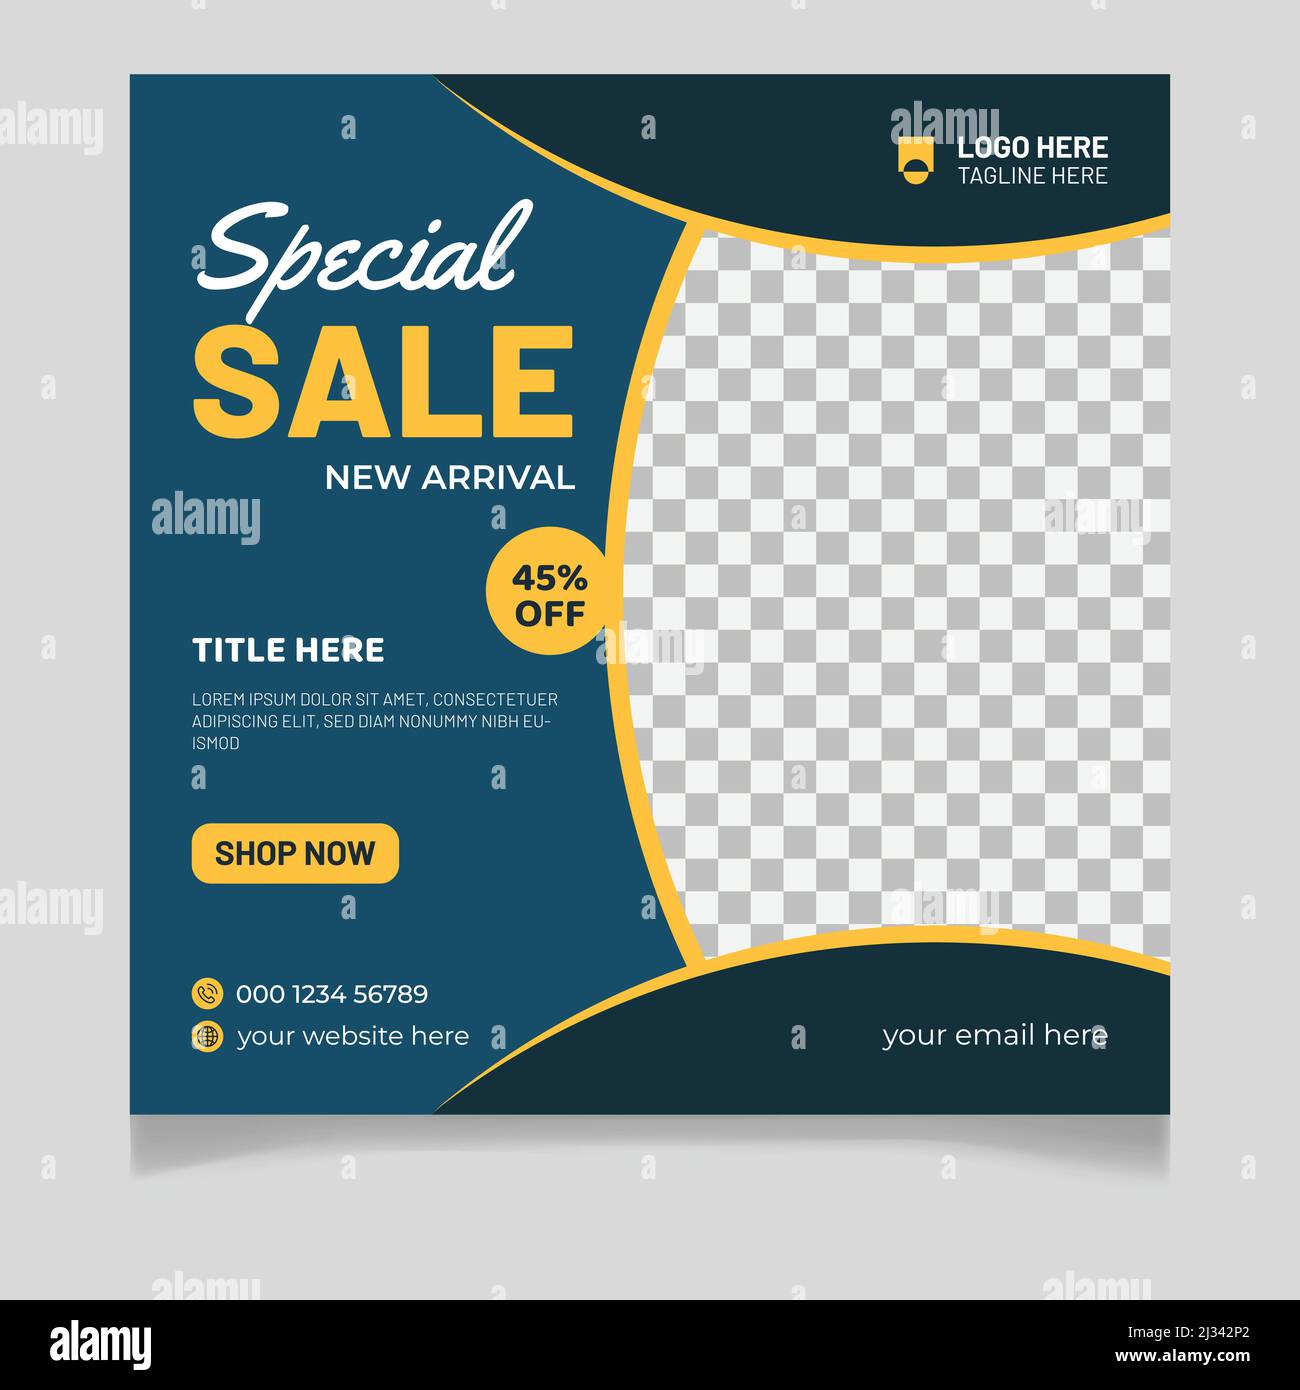 Special Sale New Arrival Social Media Post Template Stock Vector